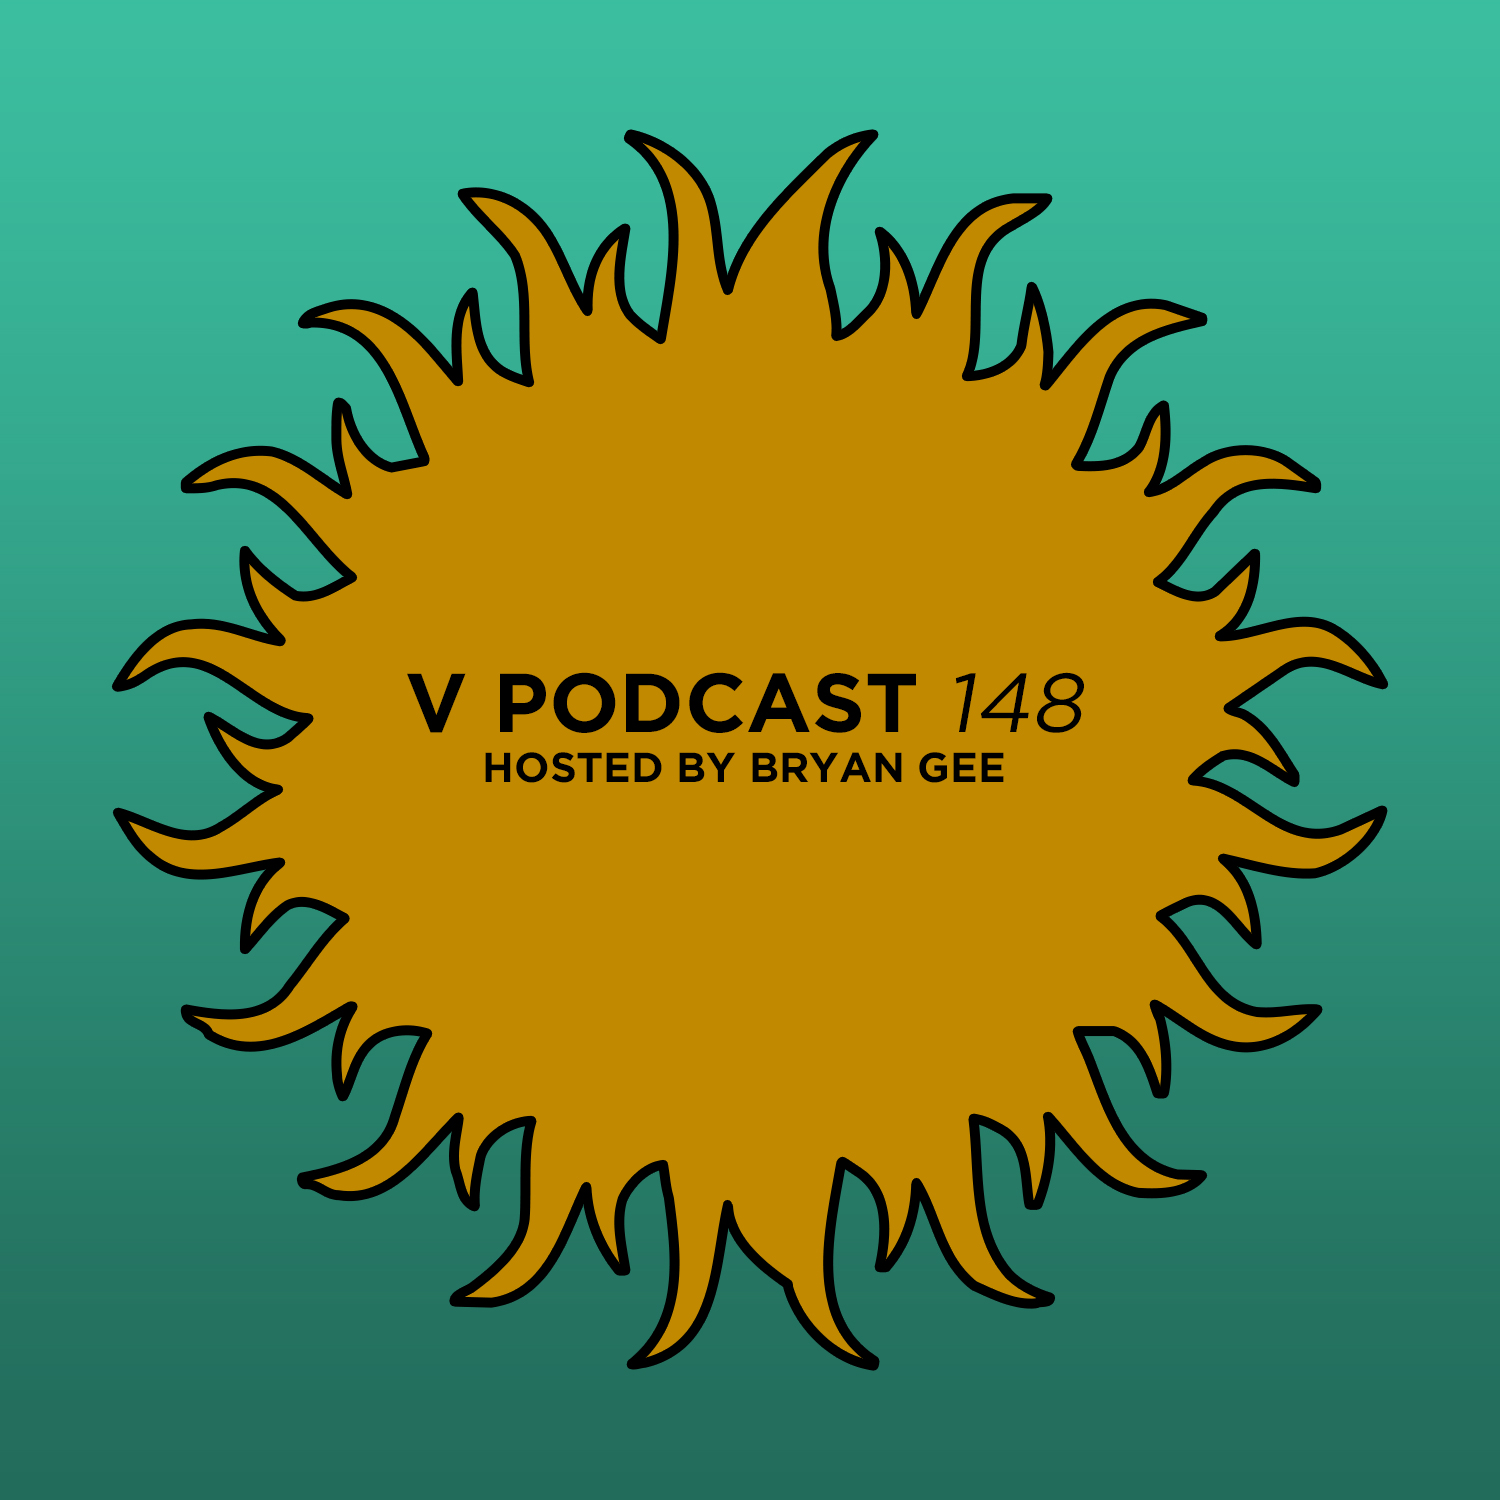 V Podcast 148 - Hosted by Bryan Gee Artwork